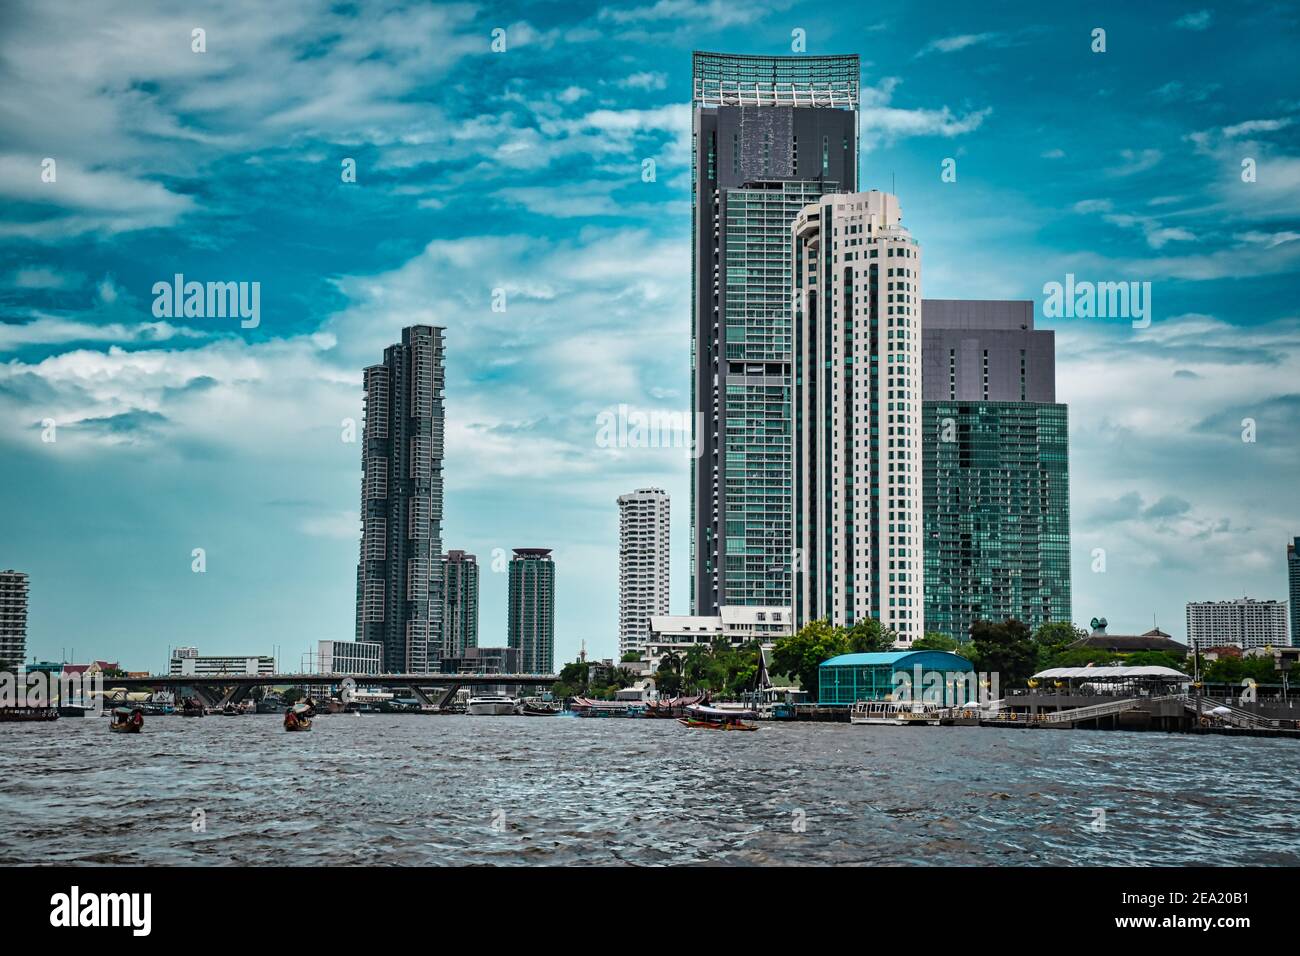 Bangkok, Thailand 08.20.2019 Skyline of Bangkok with The River condominium and the Four Seasons Private Luxury Residences on the banks of the majestic Stock Photo